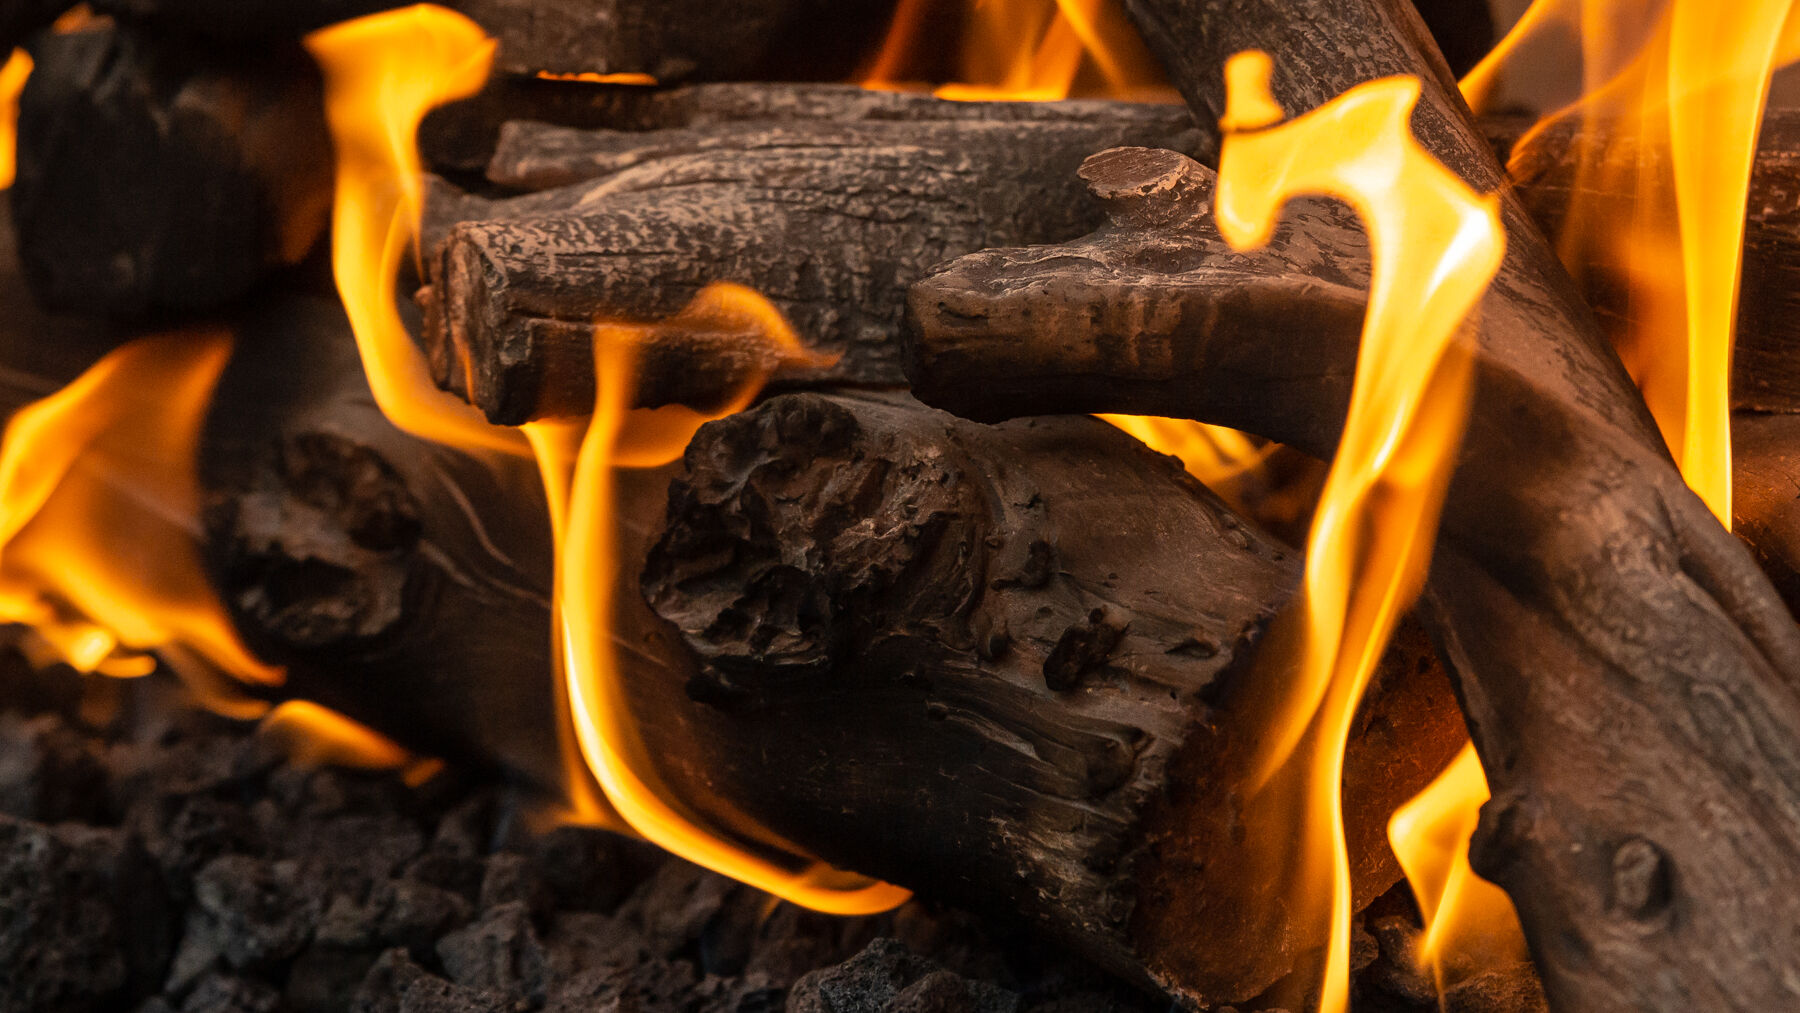 How To Place Logs In Fireplace